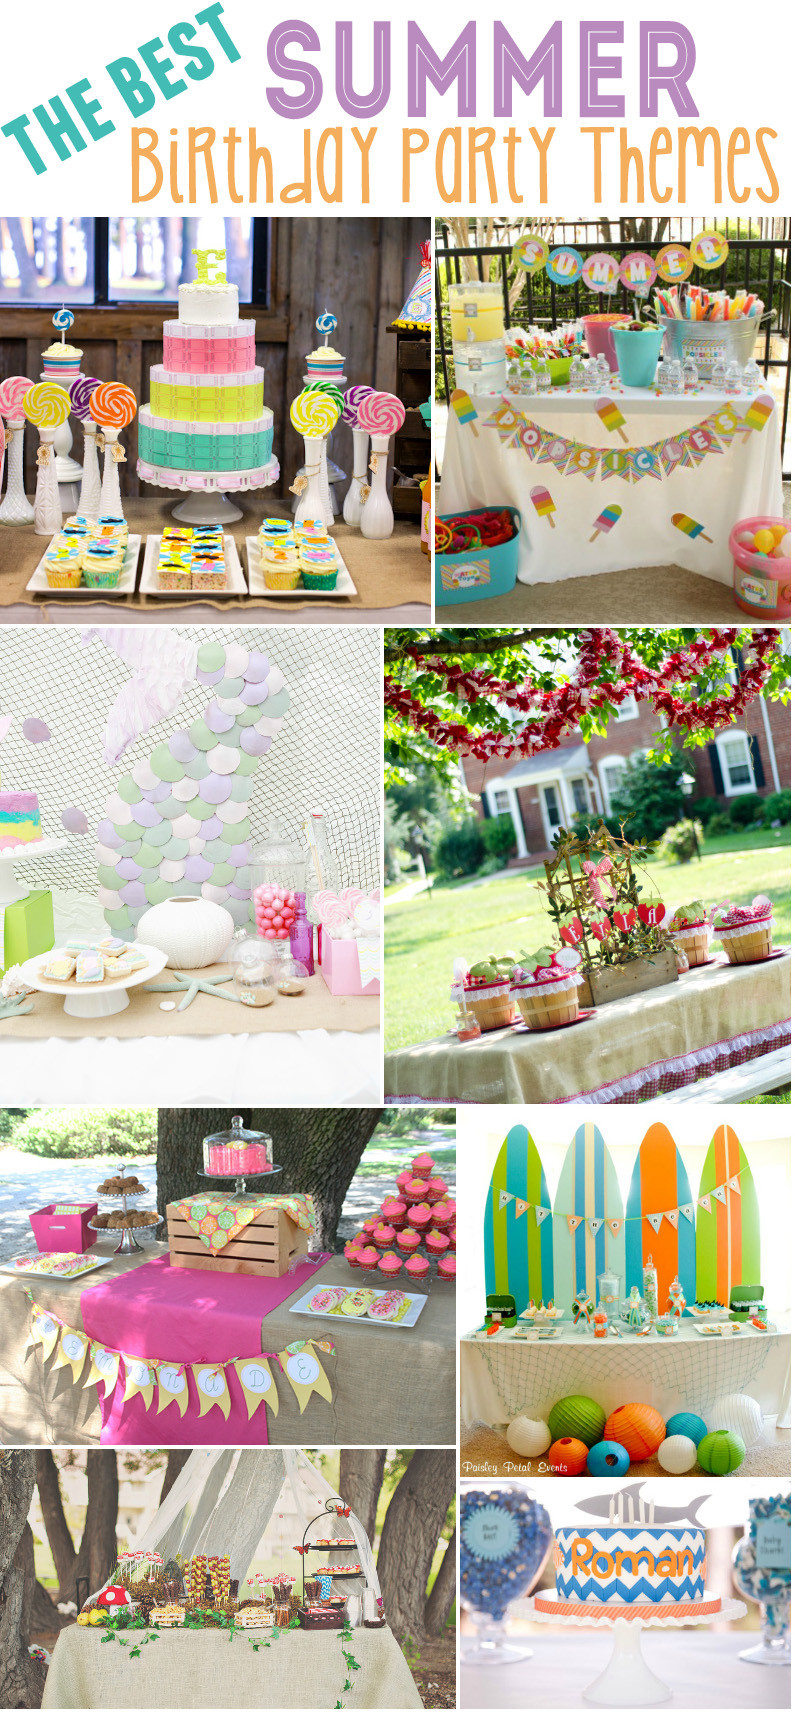 Party Theme Ideas For Summer
 15 Best Summer Birthday Party Themes Design Dazzle